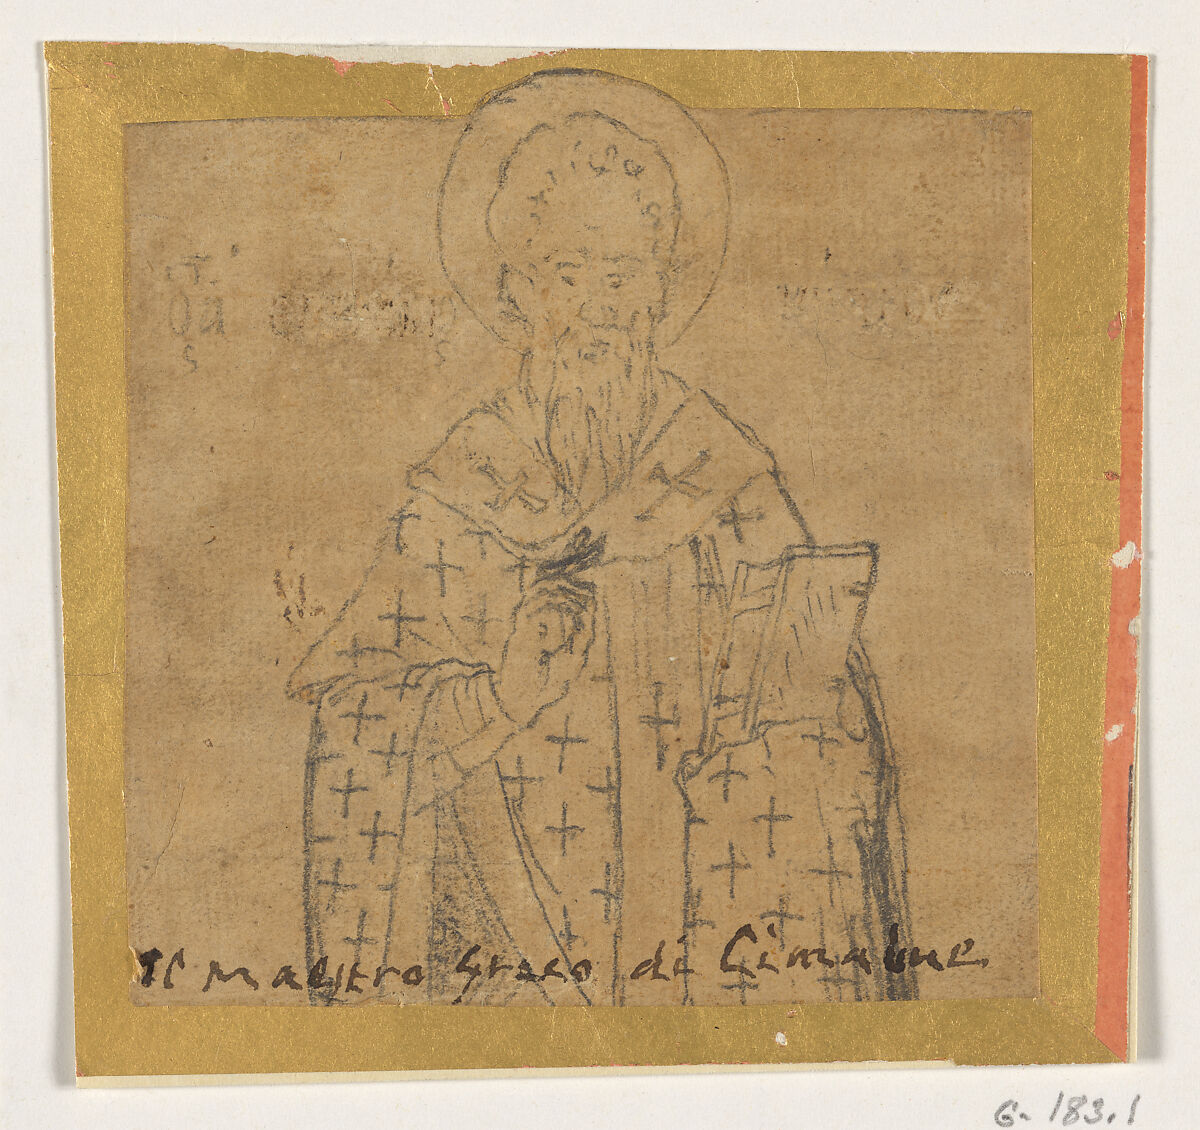 Copy of a Russian Icon, Graphite on paper cut from a larger sheet, trimmed at the top around the halo, and laid down on a larger sheet., Probably Italian